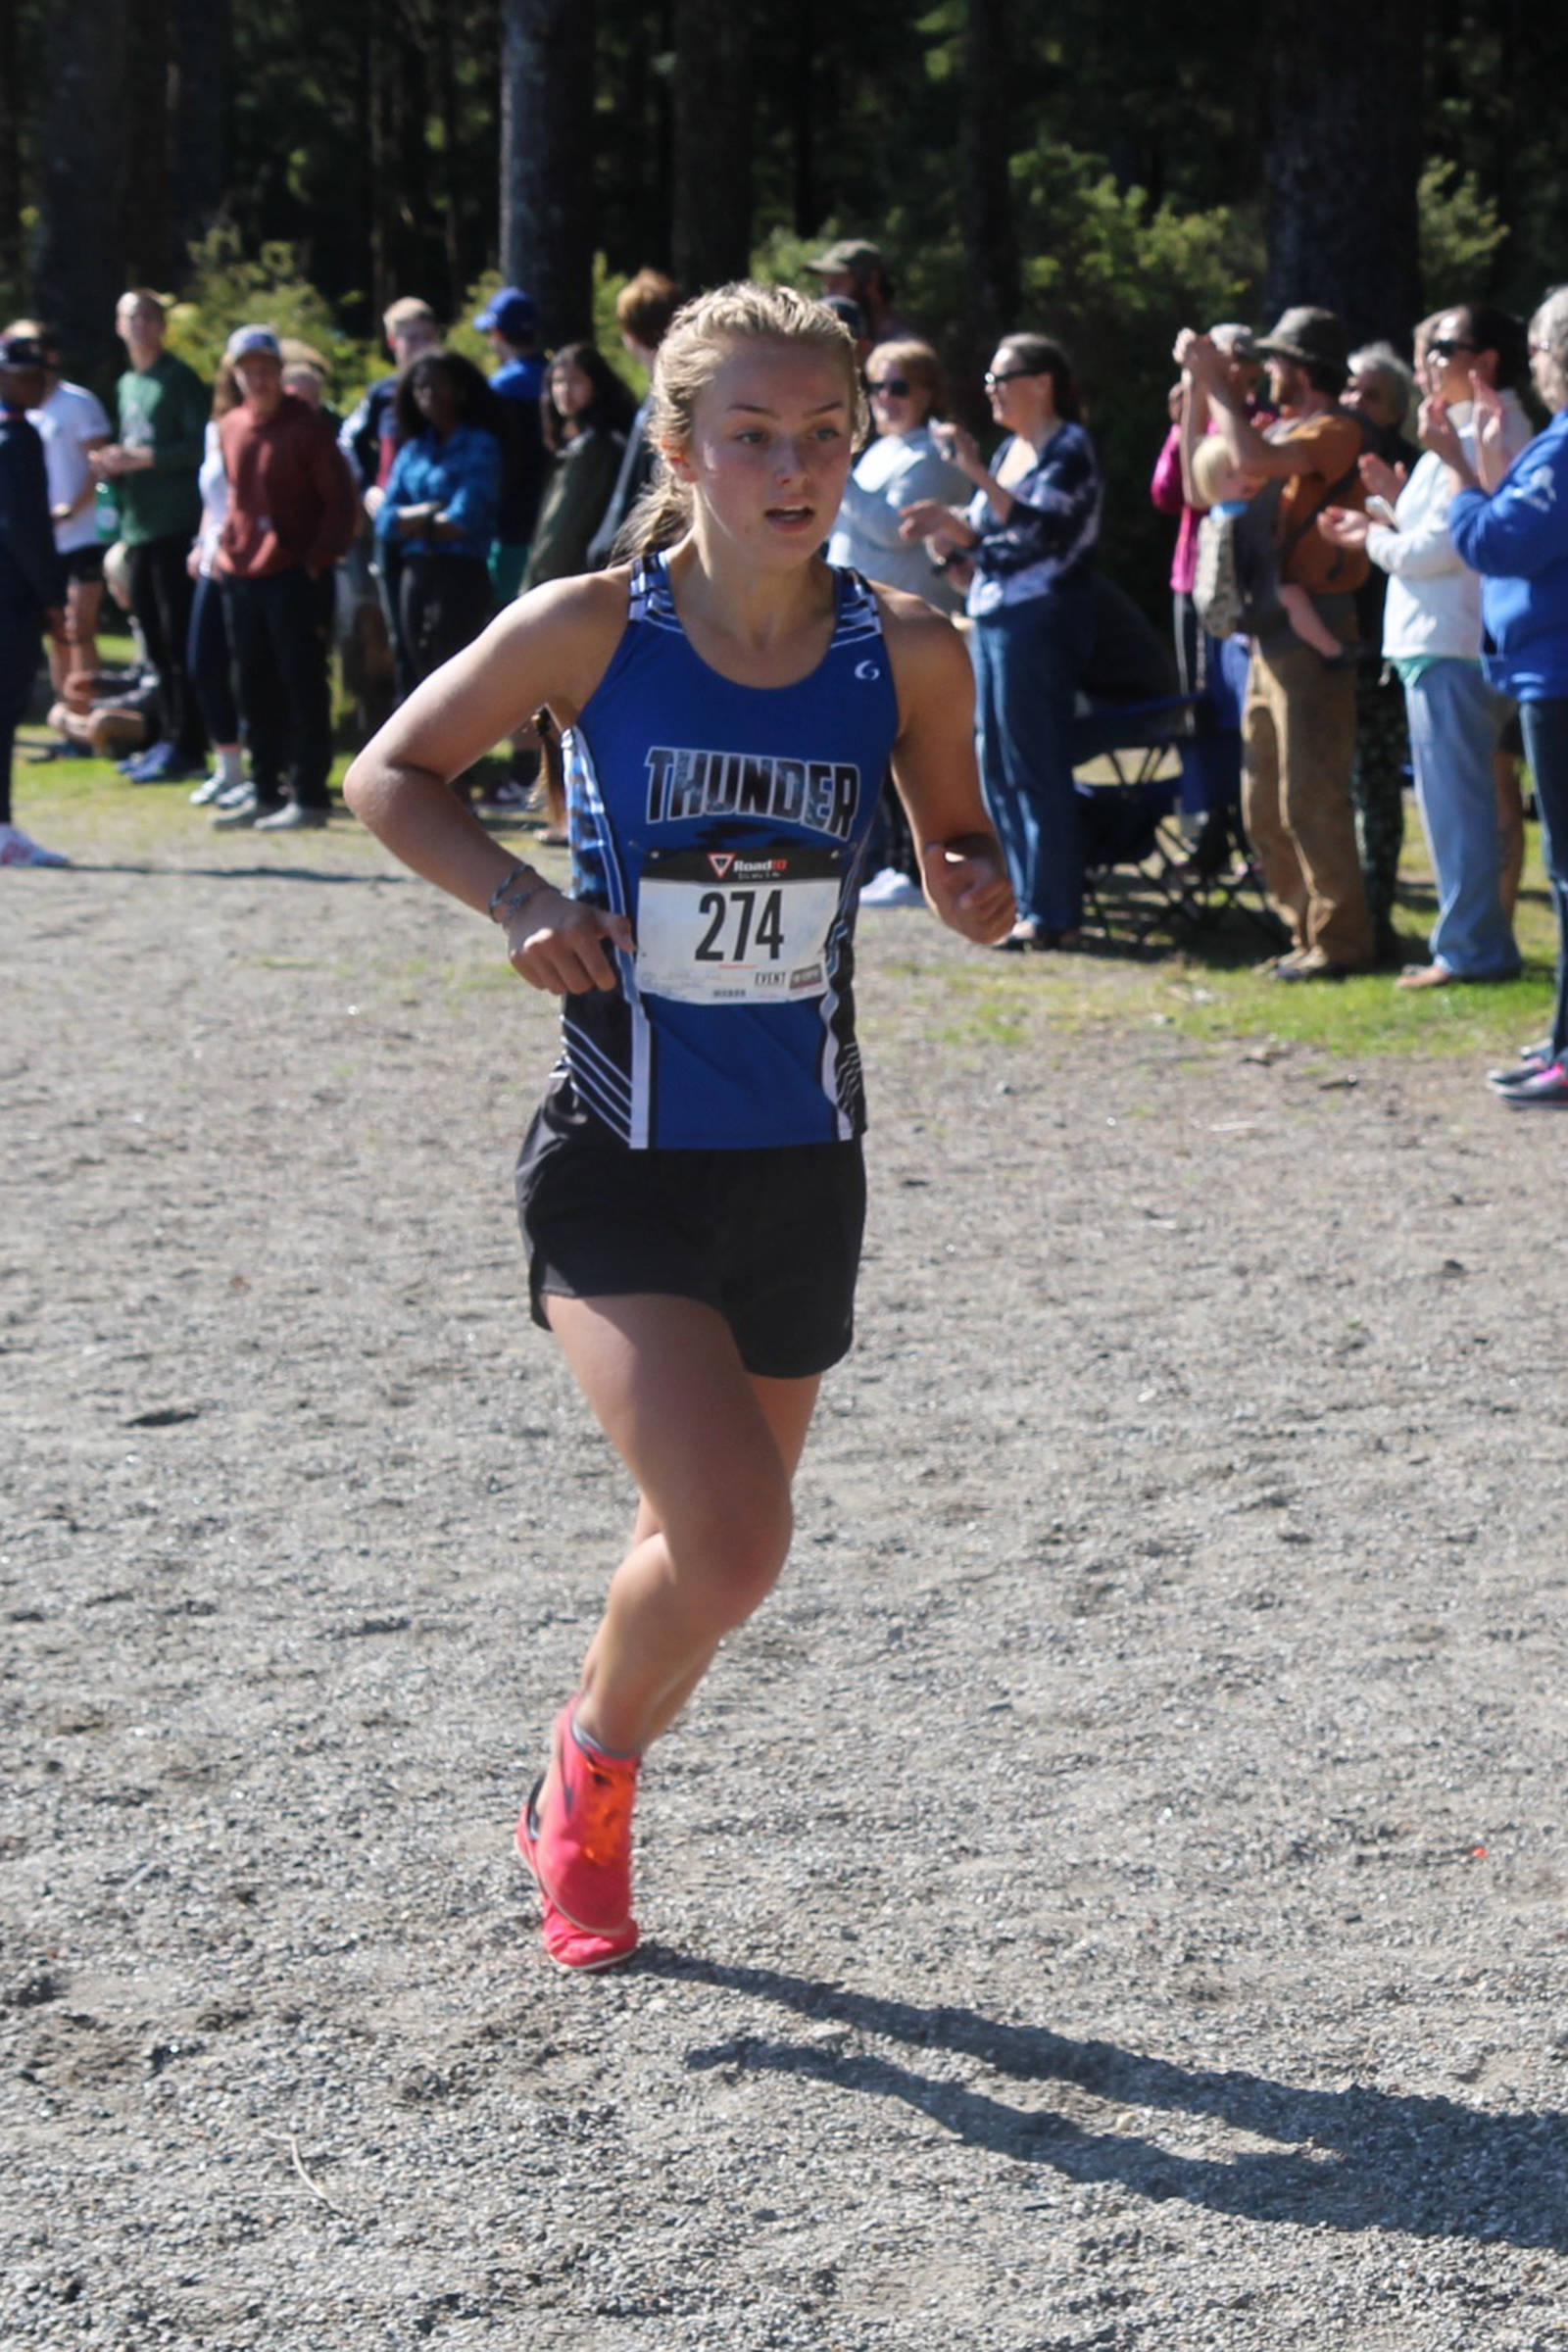 Thunder Mountain High School’s Kiah Dihle closes in on a first-place finish in the Petersburg Invitational cross country meet at Sandy Beach Park on Saturday, Sept. 7, 2019. Dihle completed the 5-kilometer course in 19 minutes, 54 seconds. (Brian Varela | Petersburg Pilot)